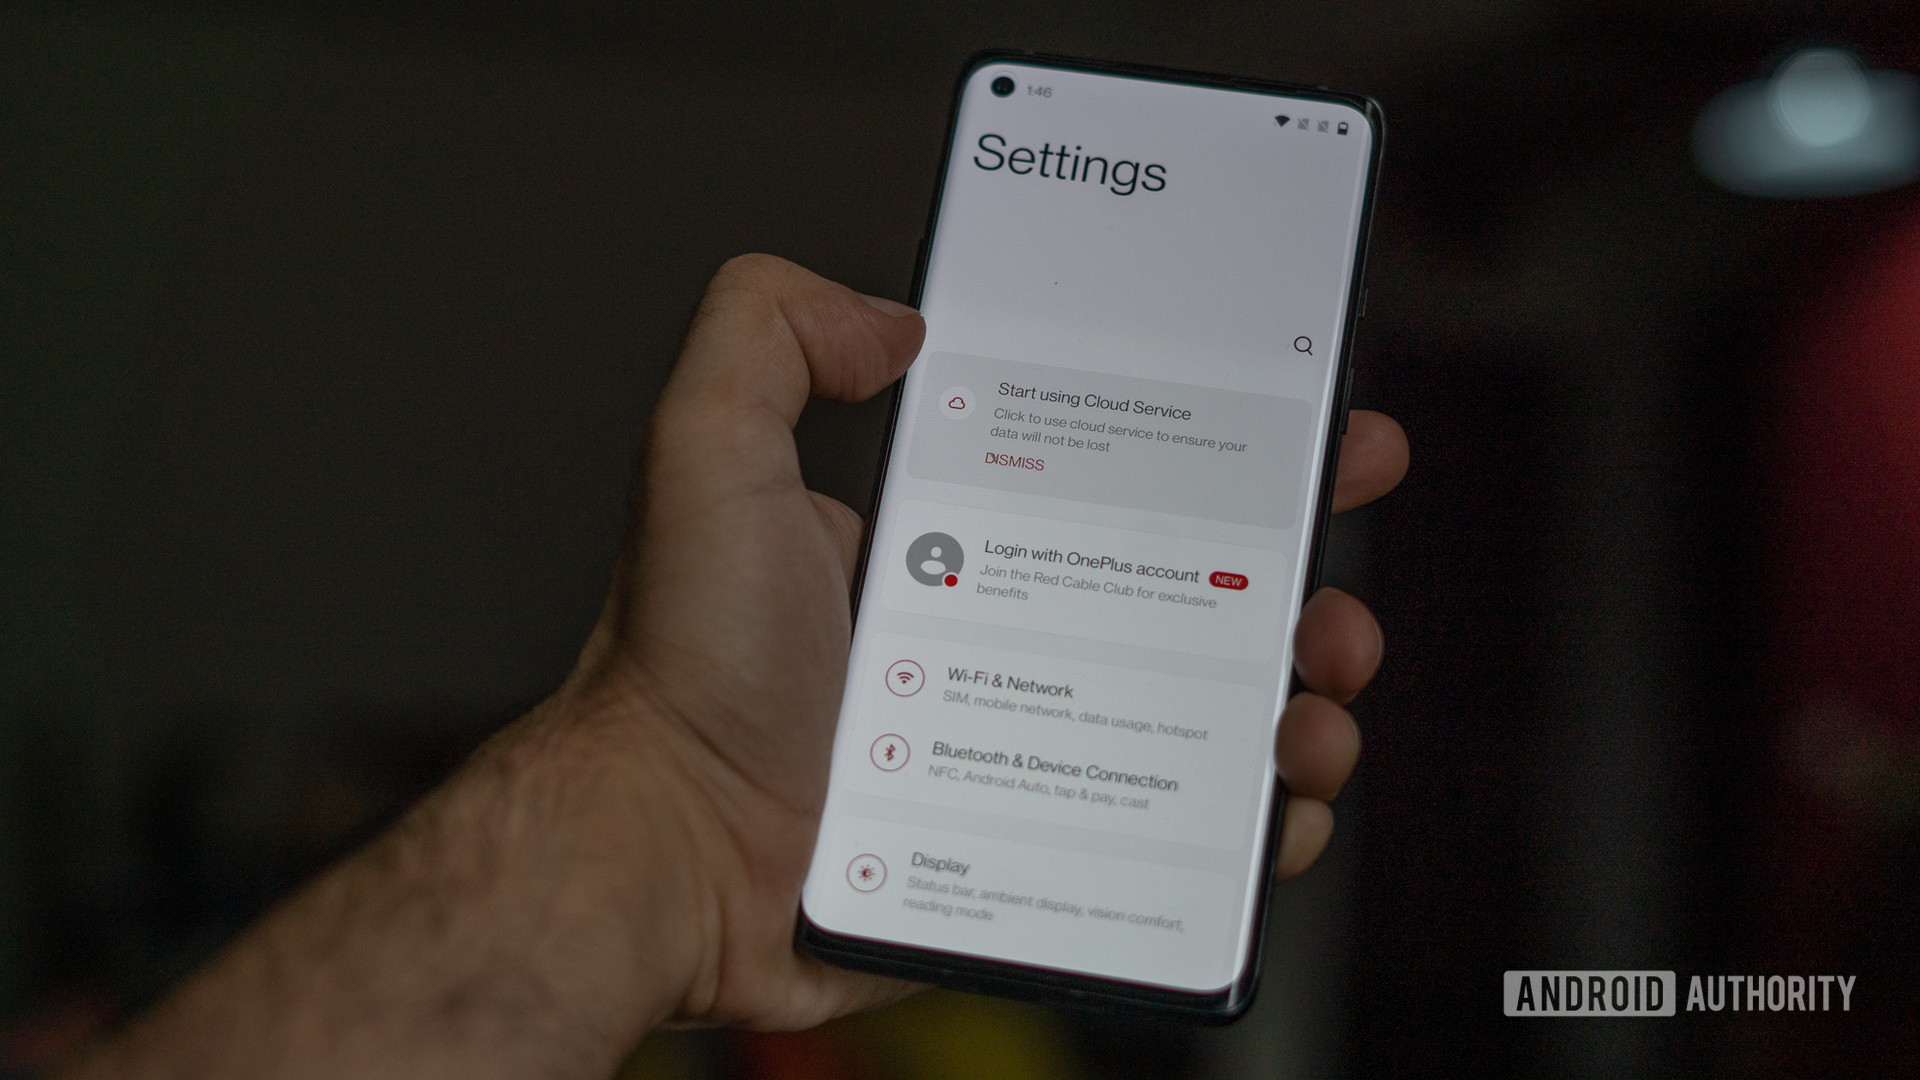 OnePlus Oxygen OS 11 Android 11 settings on phone screen in hand.